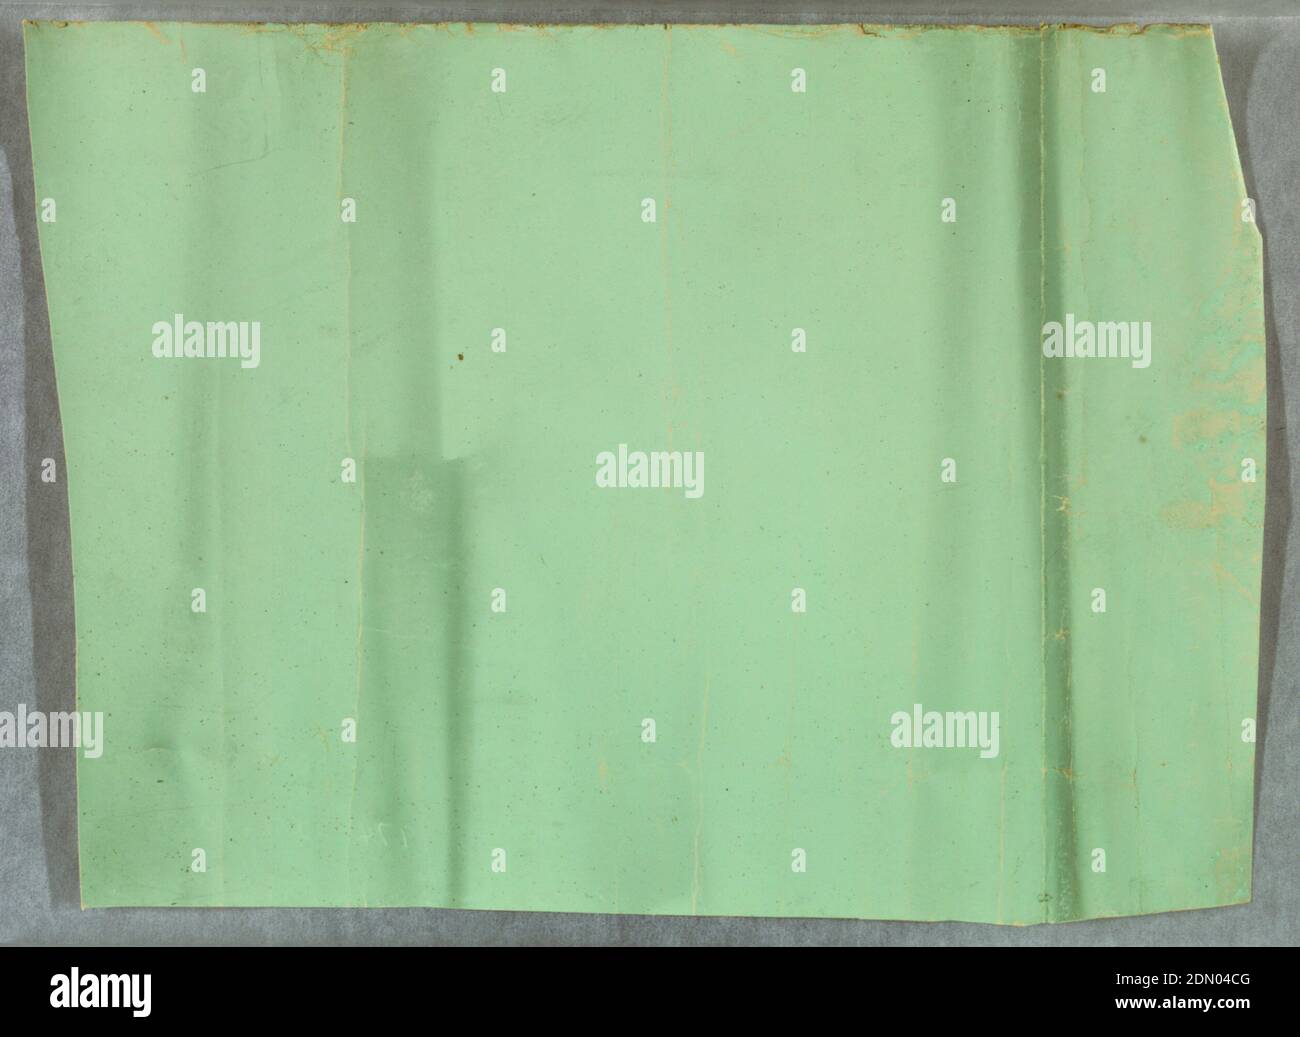 Sidewall, Brushed or machine-printed ground on rag paper, Solid light green in a mint or pistachio shade. There is no design printed on the ground., USA, 1875–1900, Wallcoverings, Sidewall Stock Photo